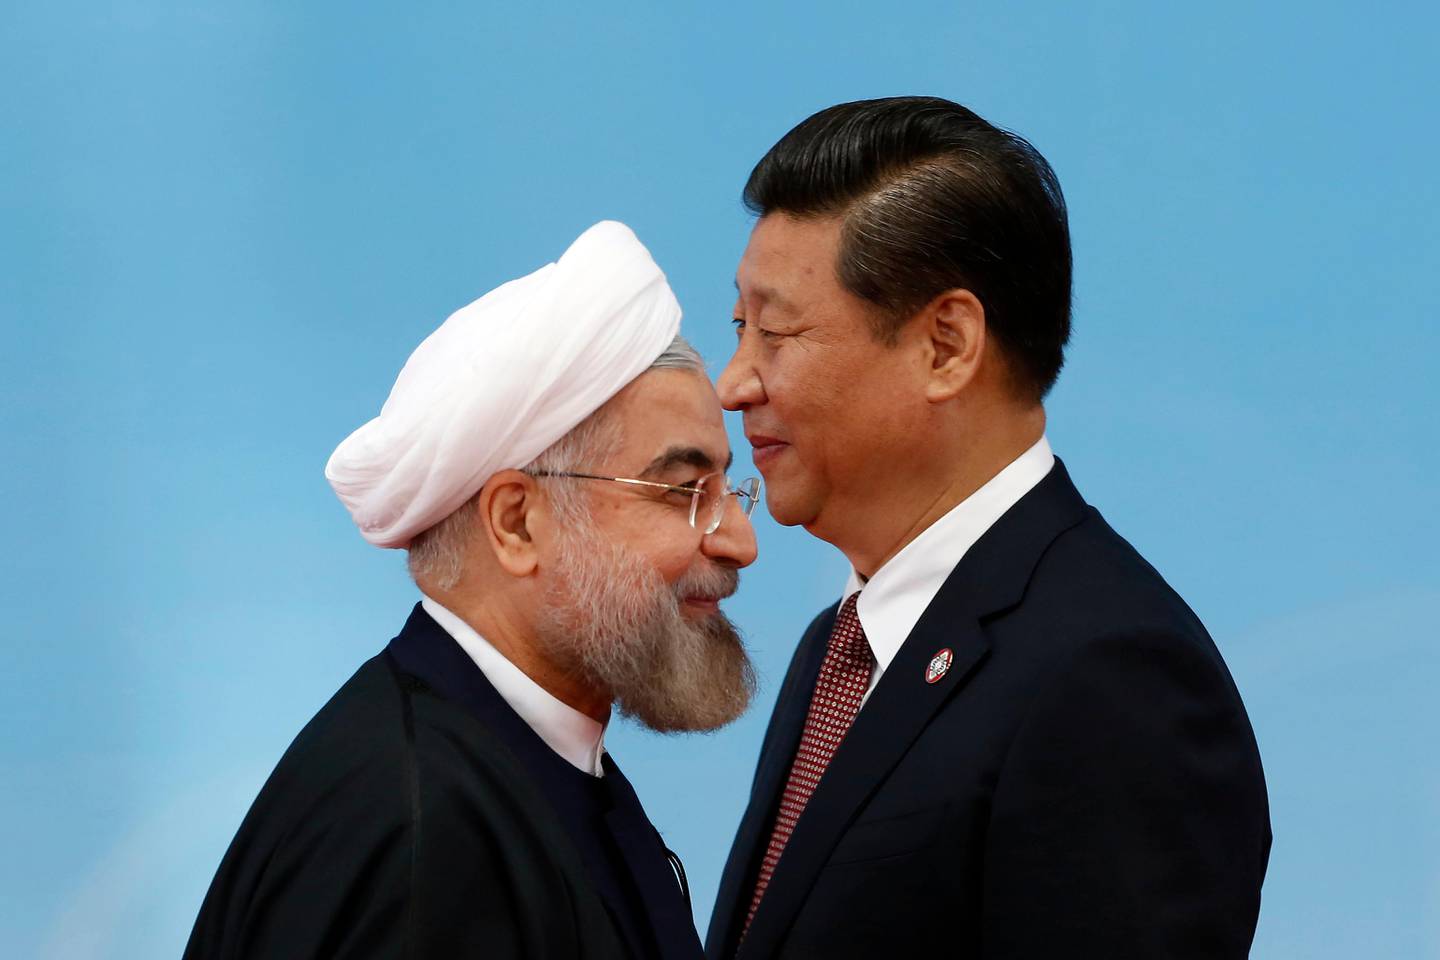 Iran's President Hassan Rouhani, left, walks away after shaking hands with Chinese President Xi Jinping before the opening ceremony at the fourth Conference on Interaction and Confidence Building Measures in Asia (CICA) summit in Shanghai, China Wednesday, May 21, 2014. (AP Photo/Aly Song, Pool)